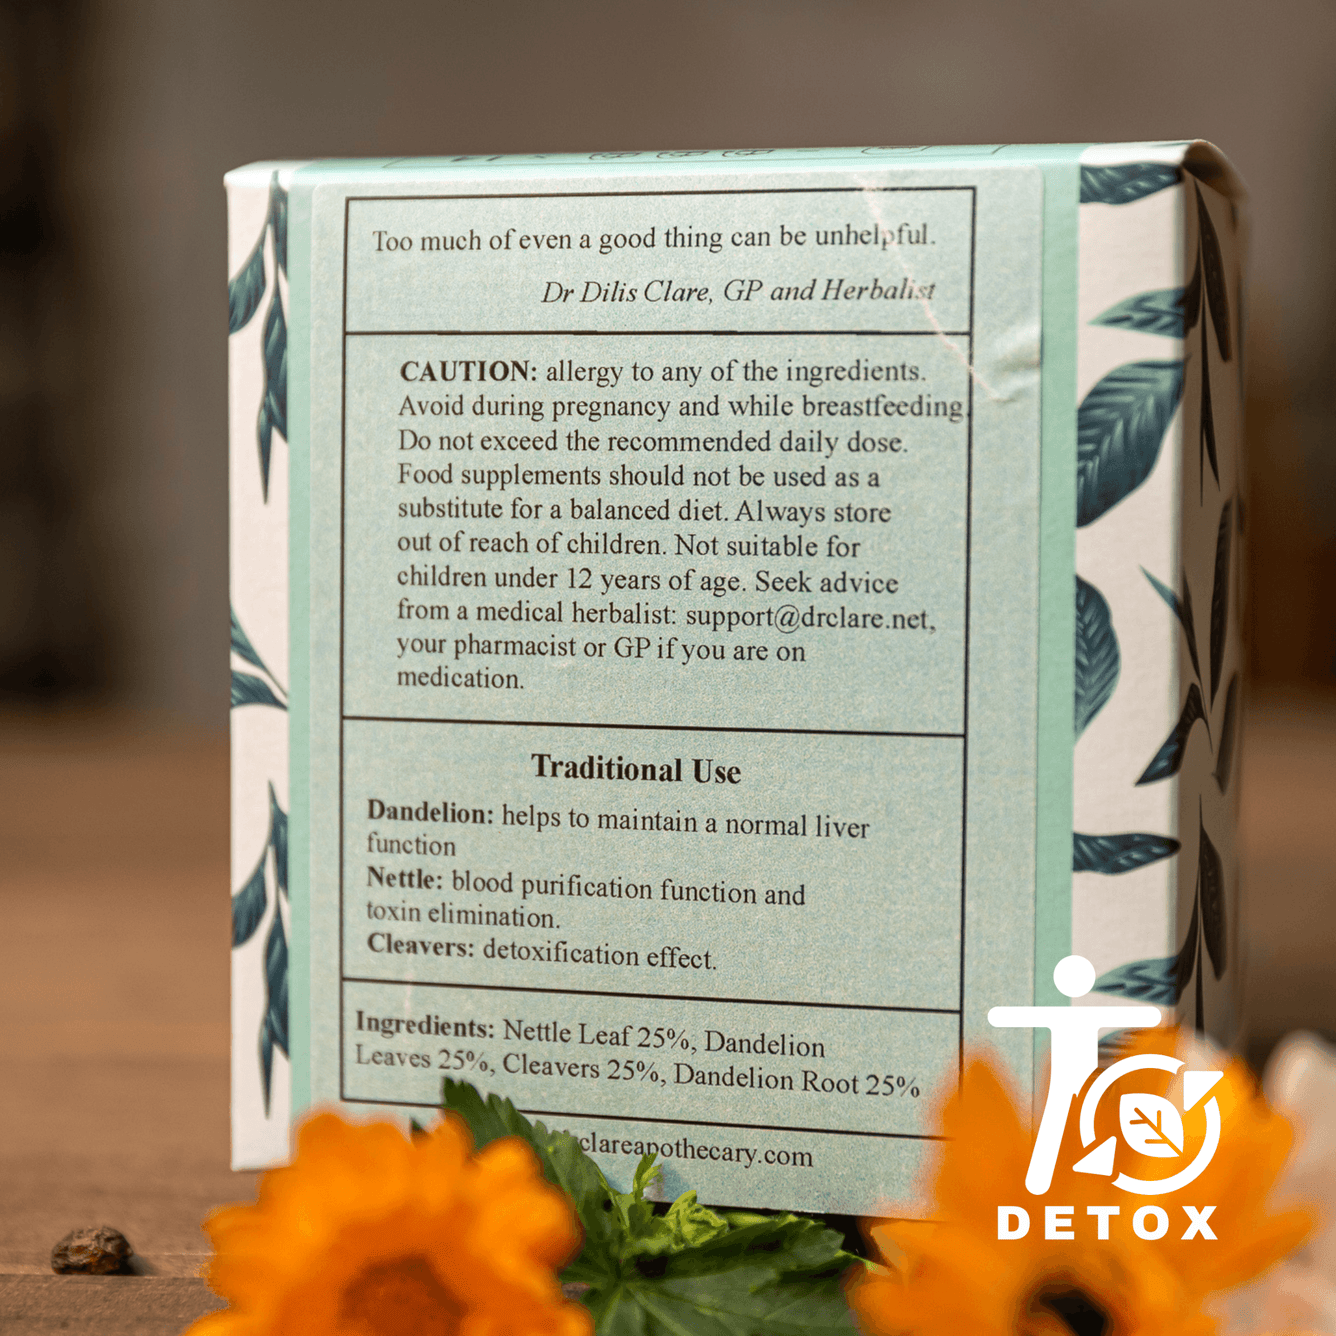 D-TOX TEABAGS - DrClareApothecary